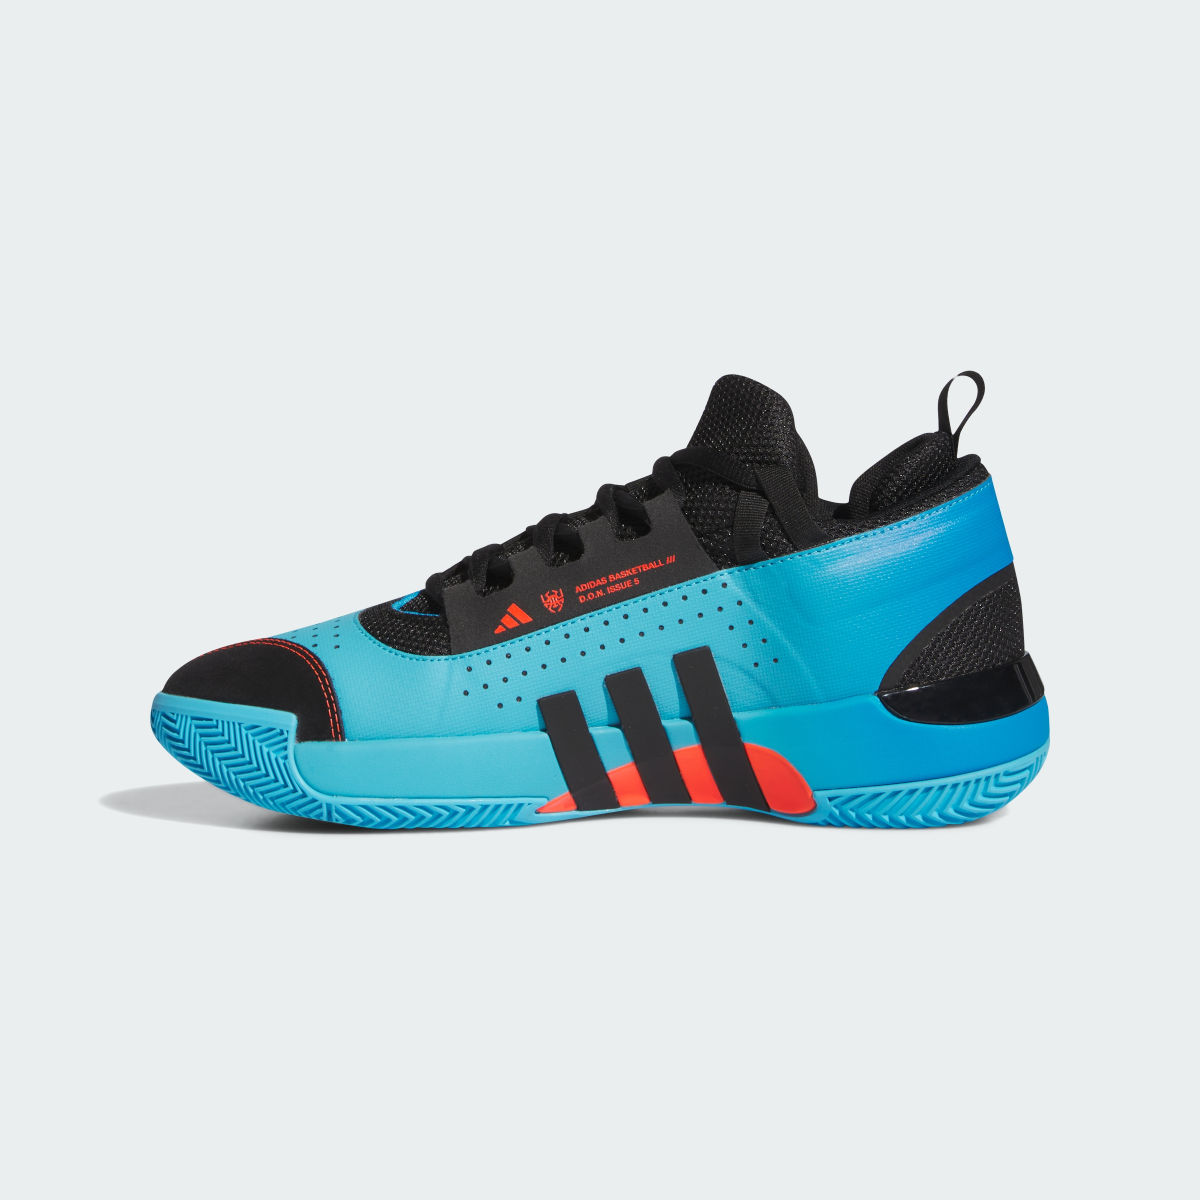 Adidas D.O.N. Issue 5 Basketball Shoes. 7